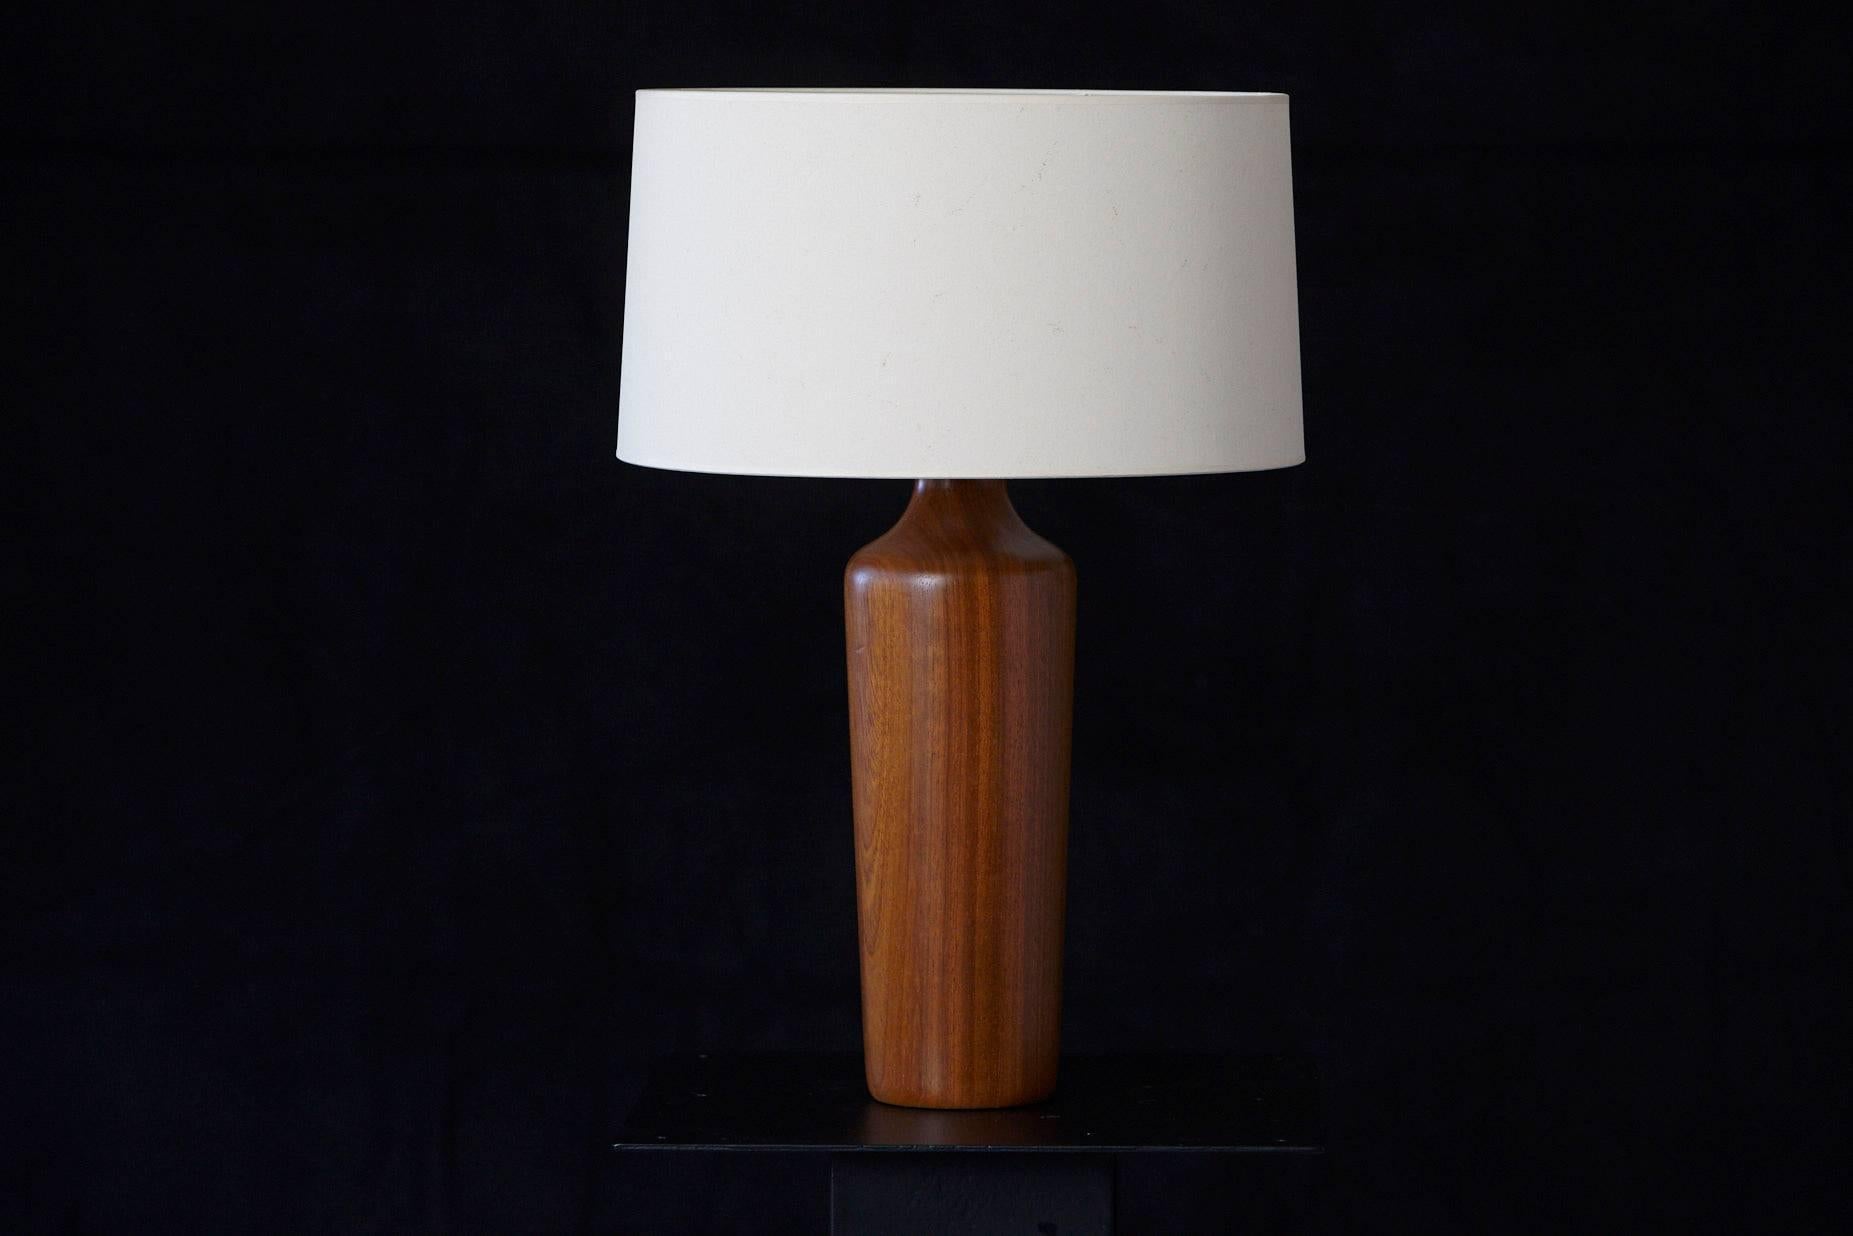 Beautiful Scandinavian modern  minimalist solid teak table lamp with a very nice patina, circa 1960s.
Measures: Height to finial 23.5 inches.